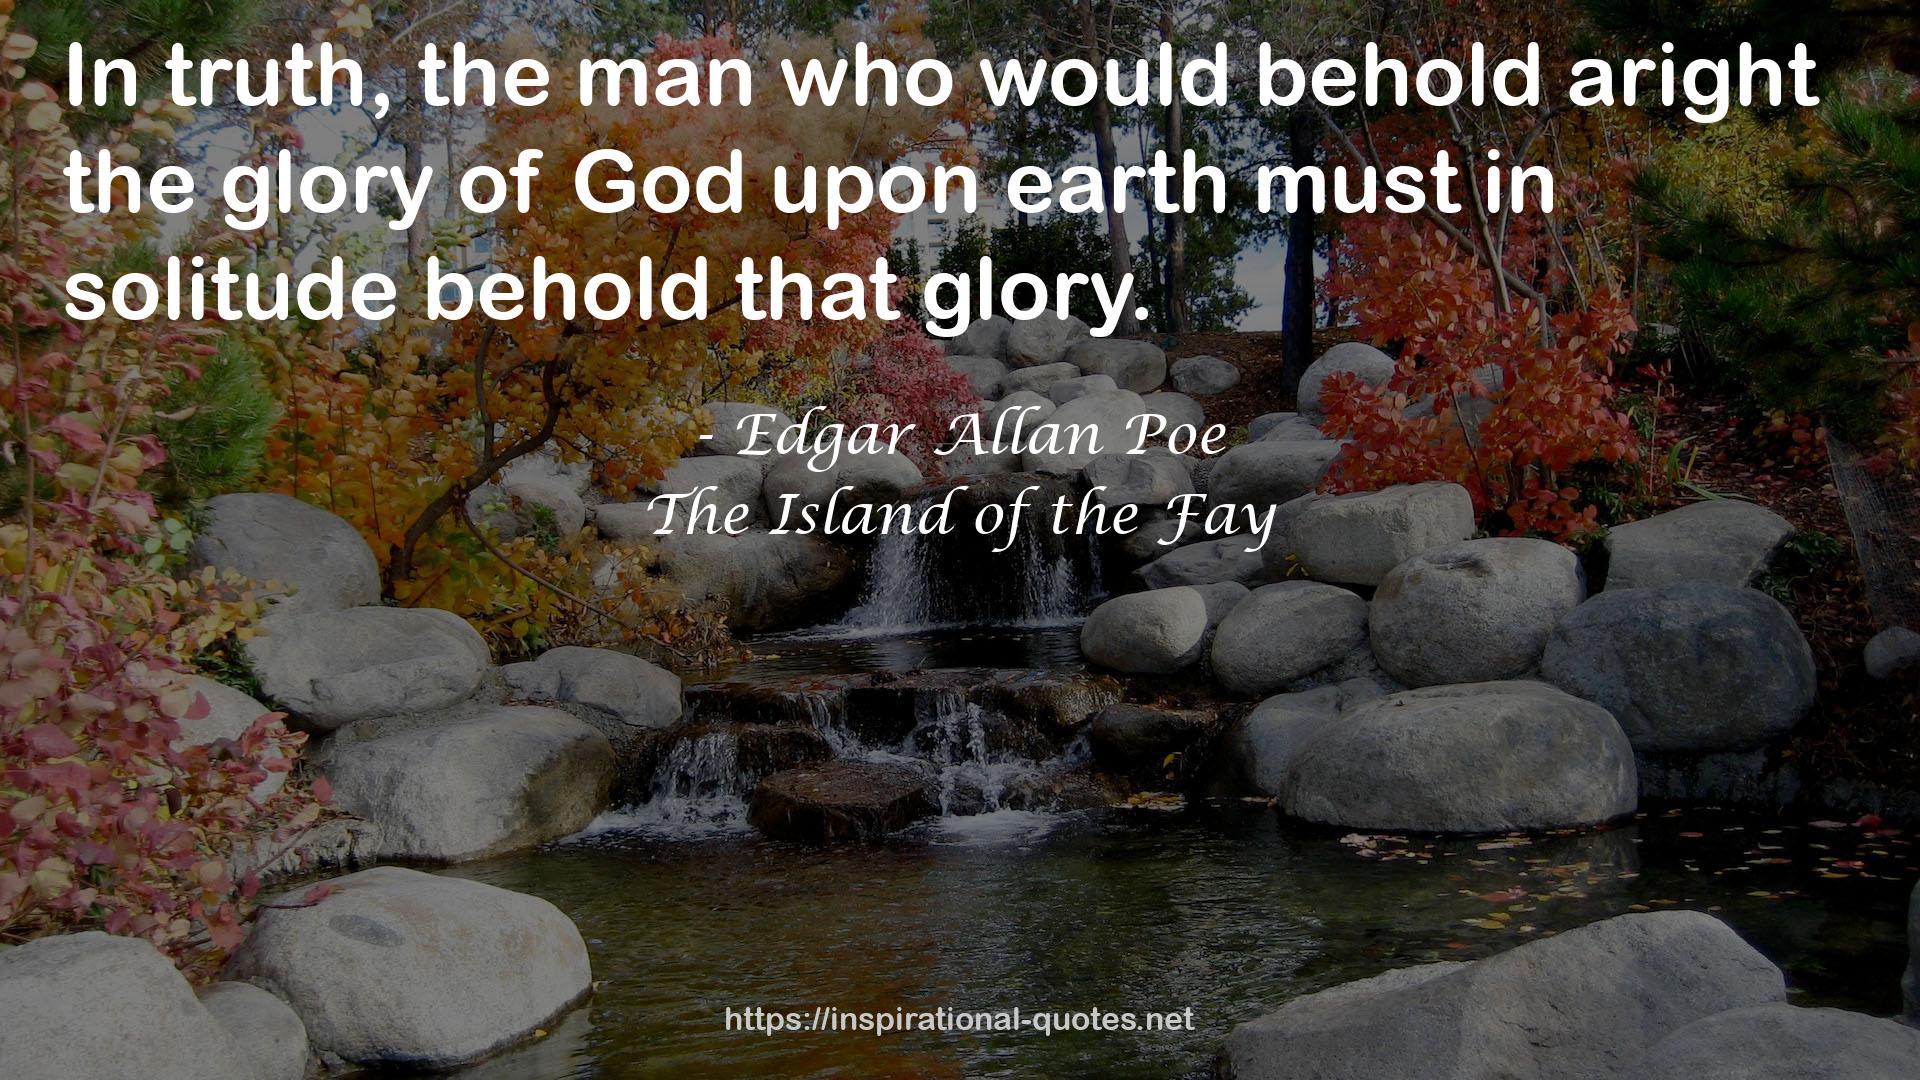 The Island of the Fay QUOTES